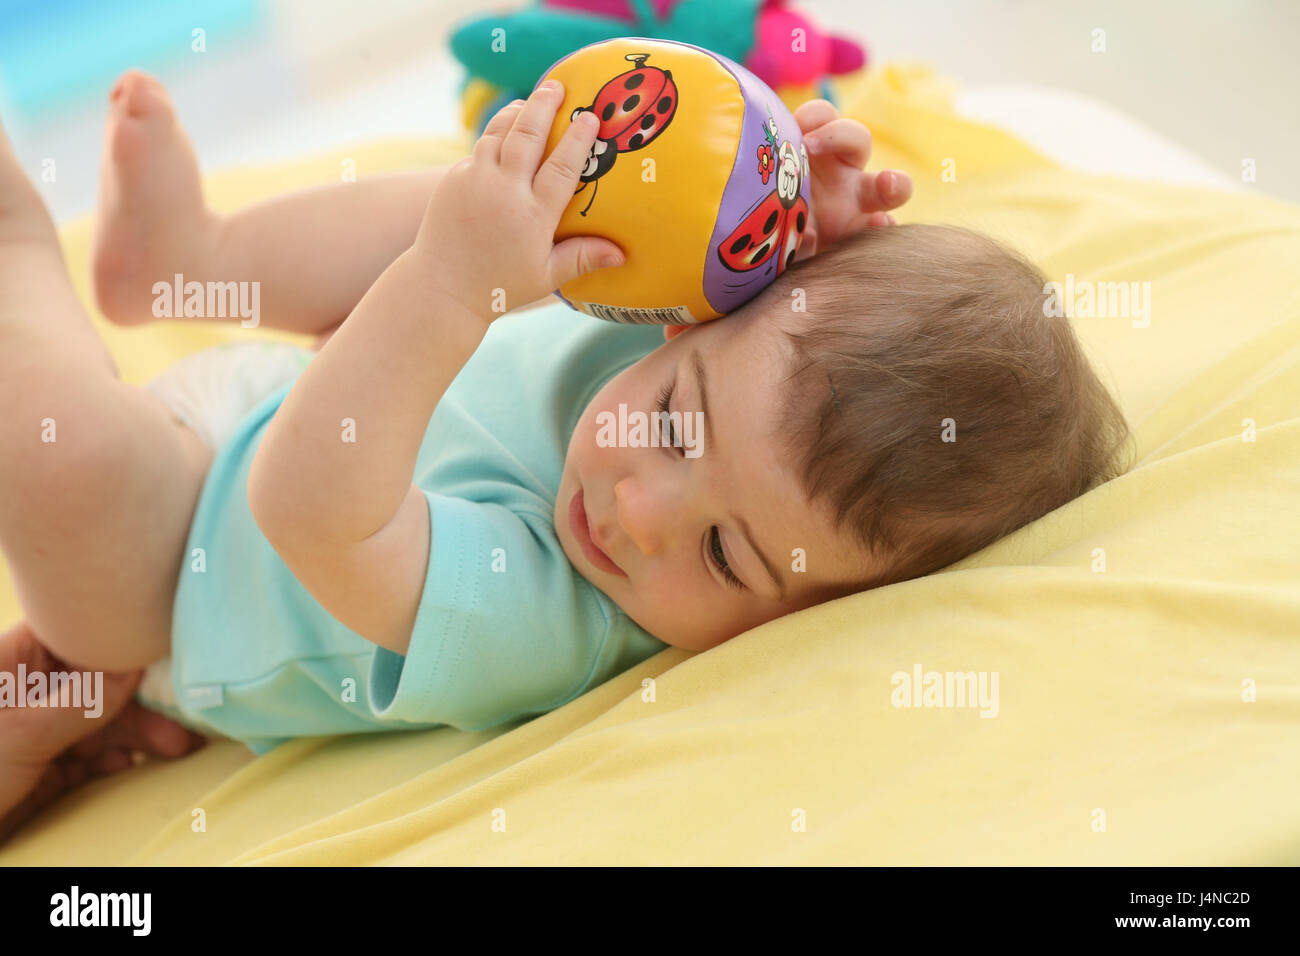 Baby, 7 months, lie, hold ball, at the side, Stock Photo